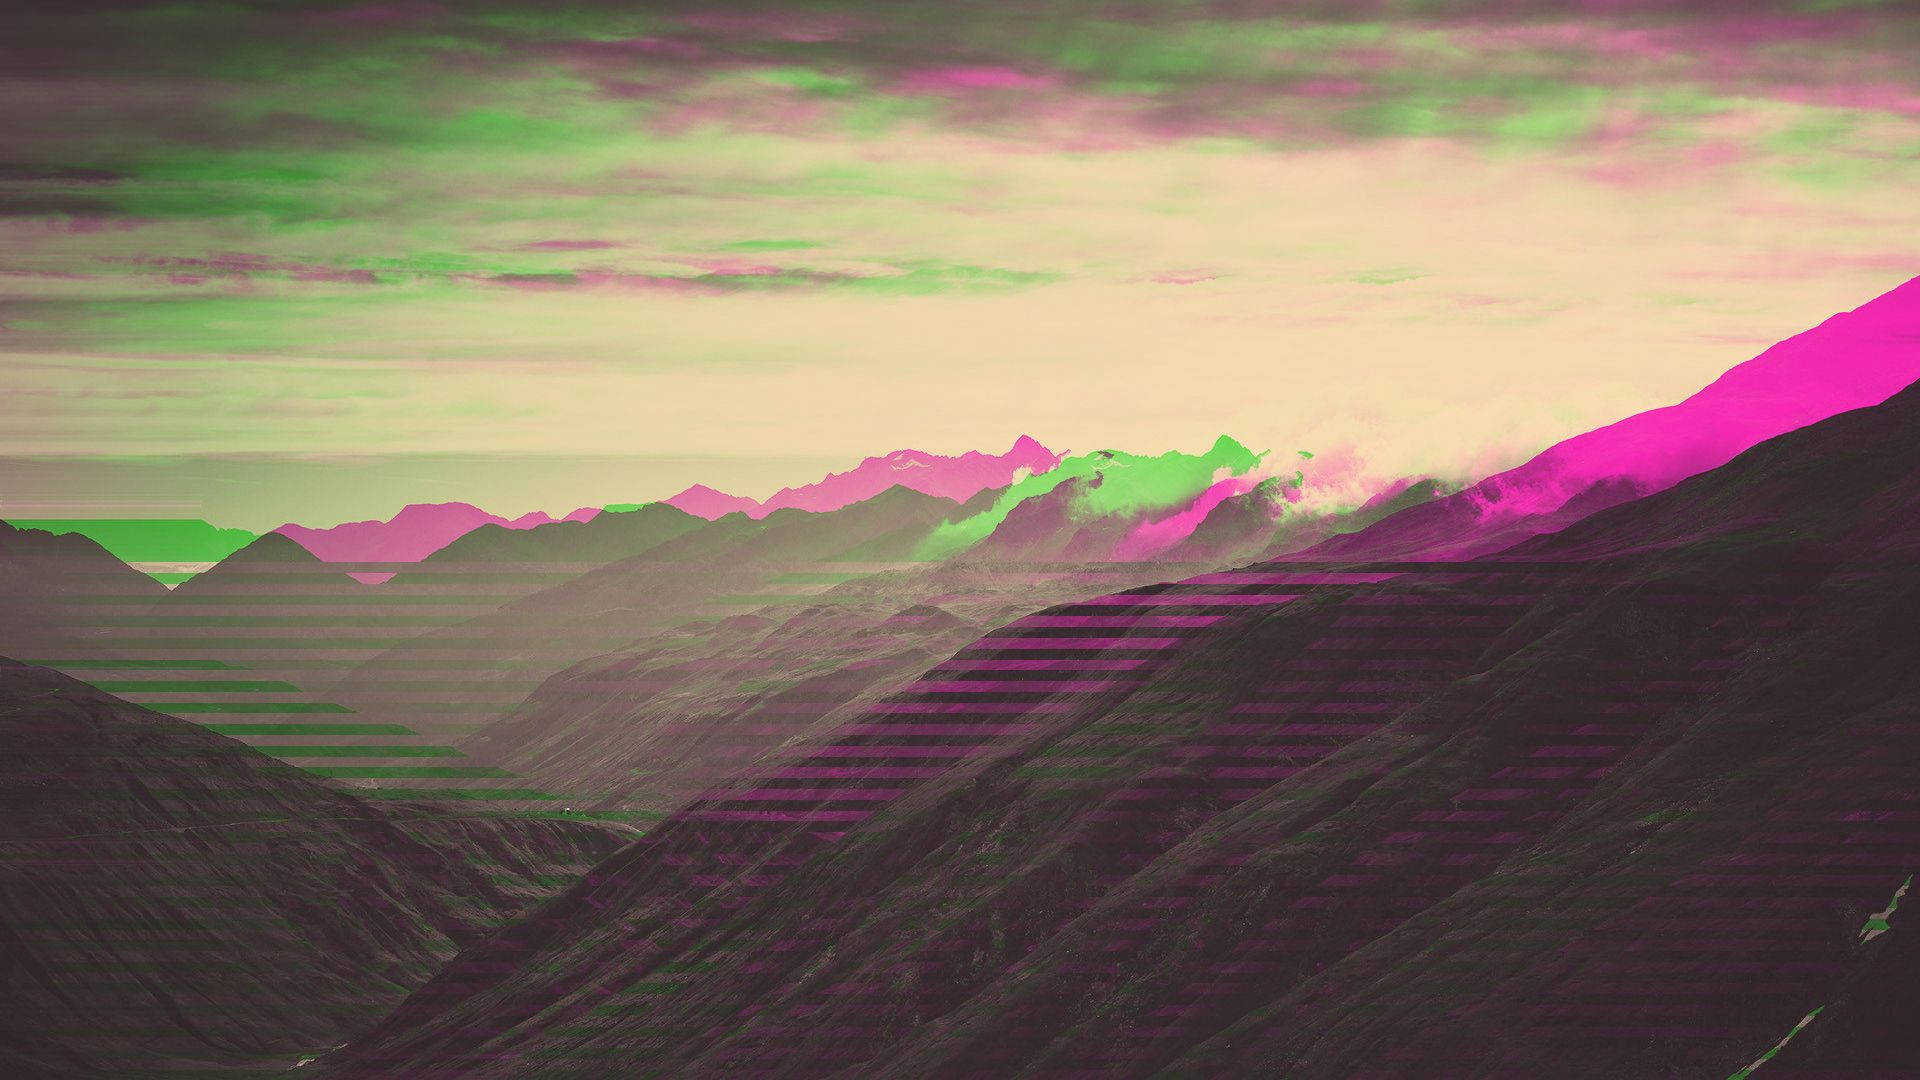 A mountain peak surrounded by a glitchy digital overlay Wallpaper